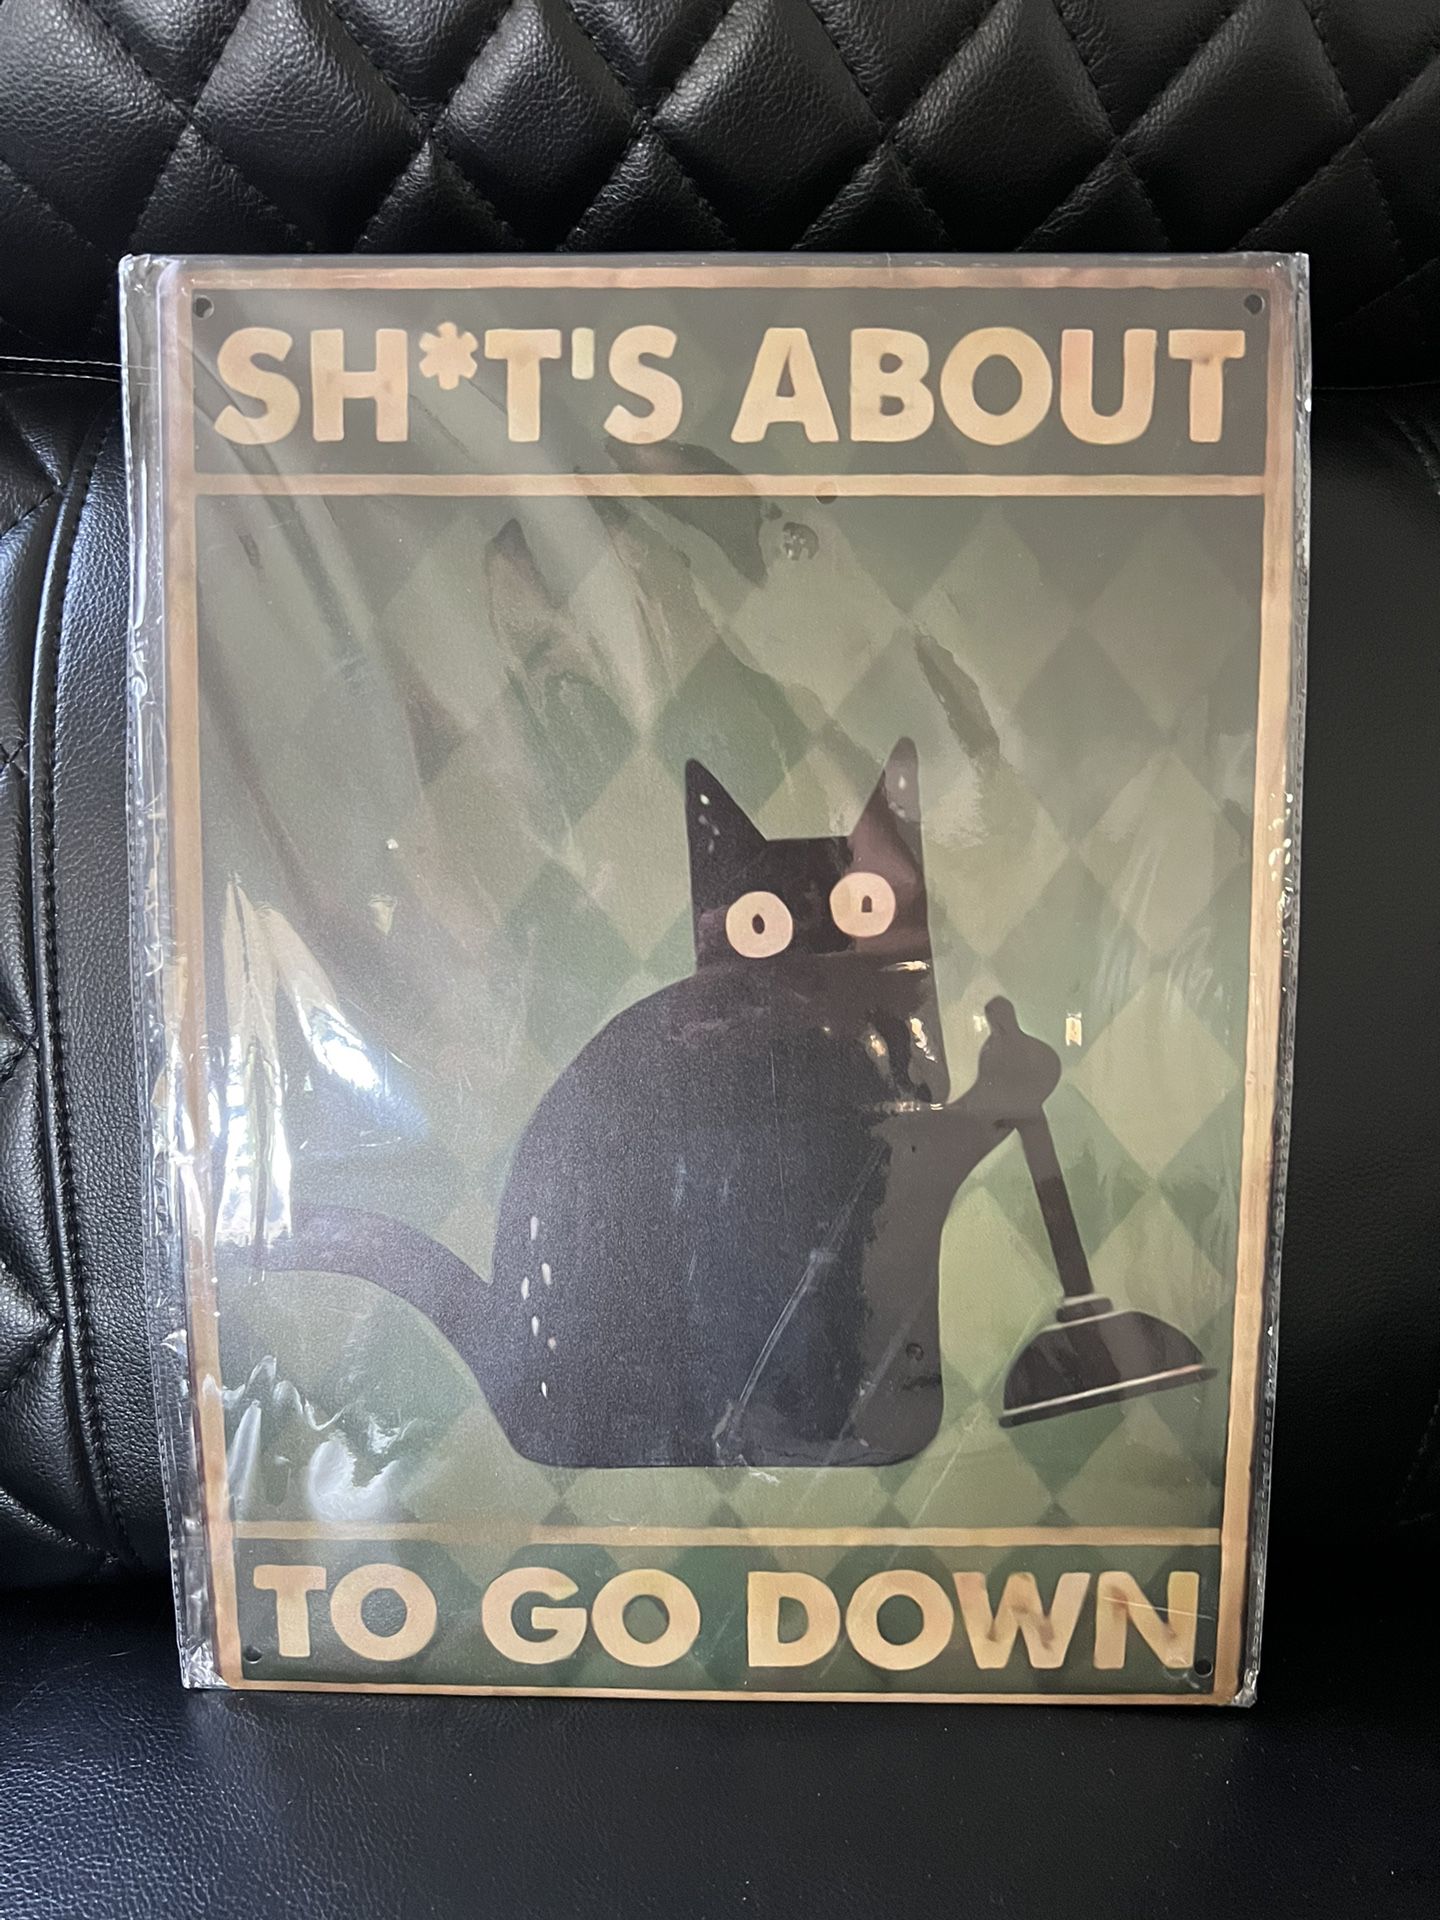 NEW - “Sh*t’s about to go down” black cat metal bathroom print